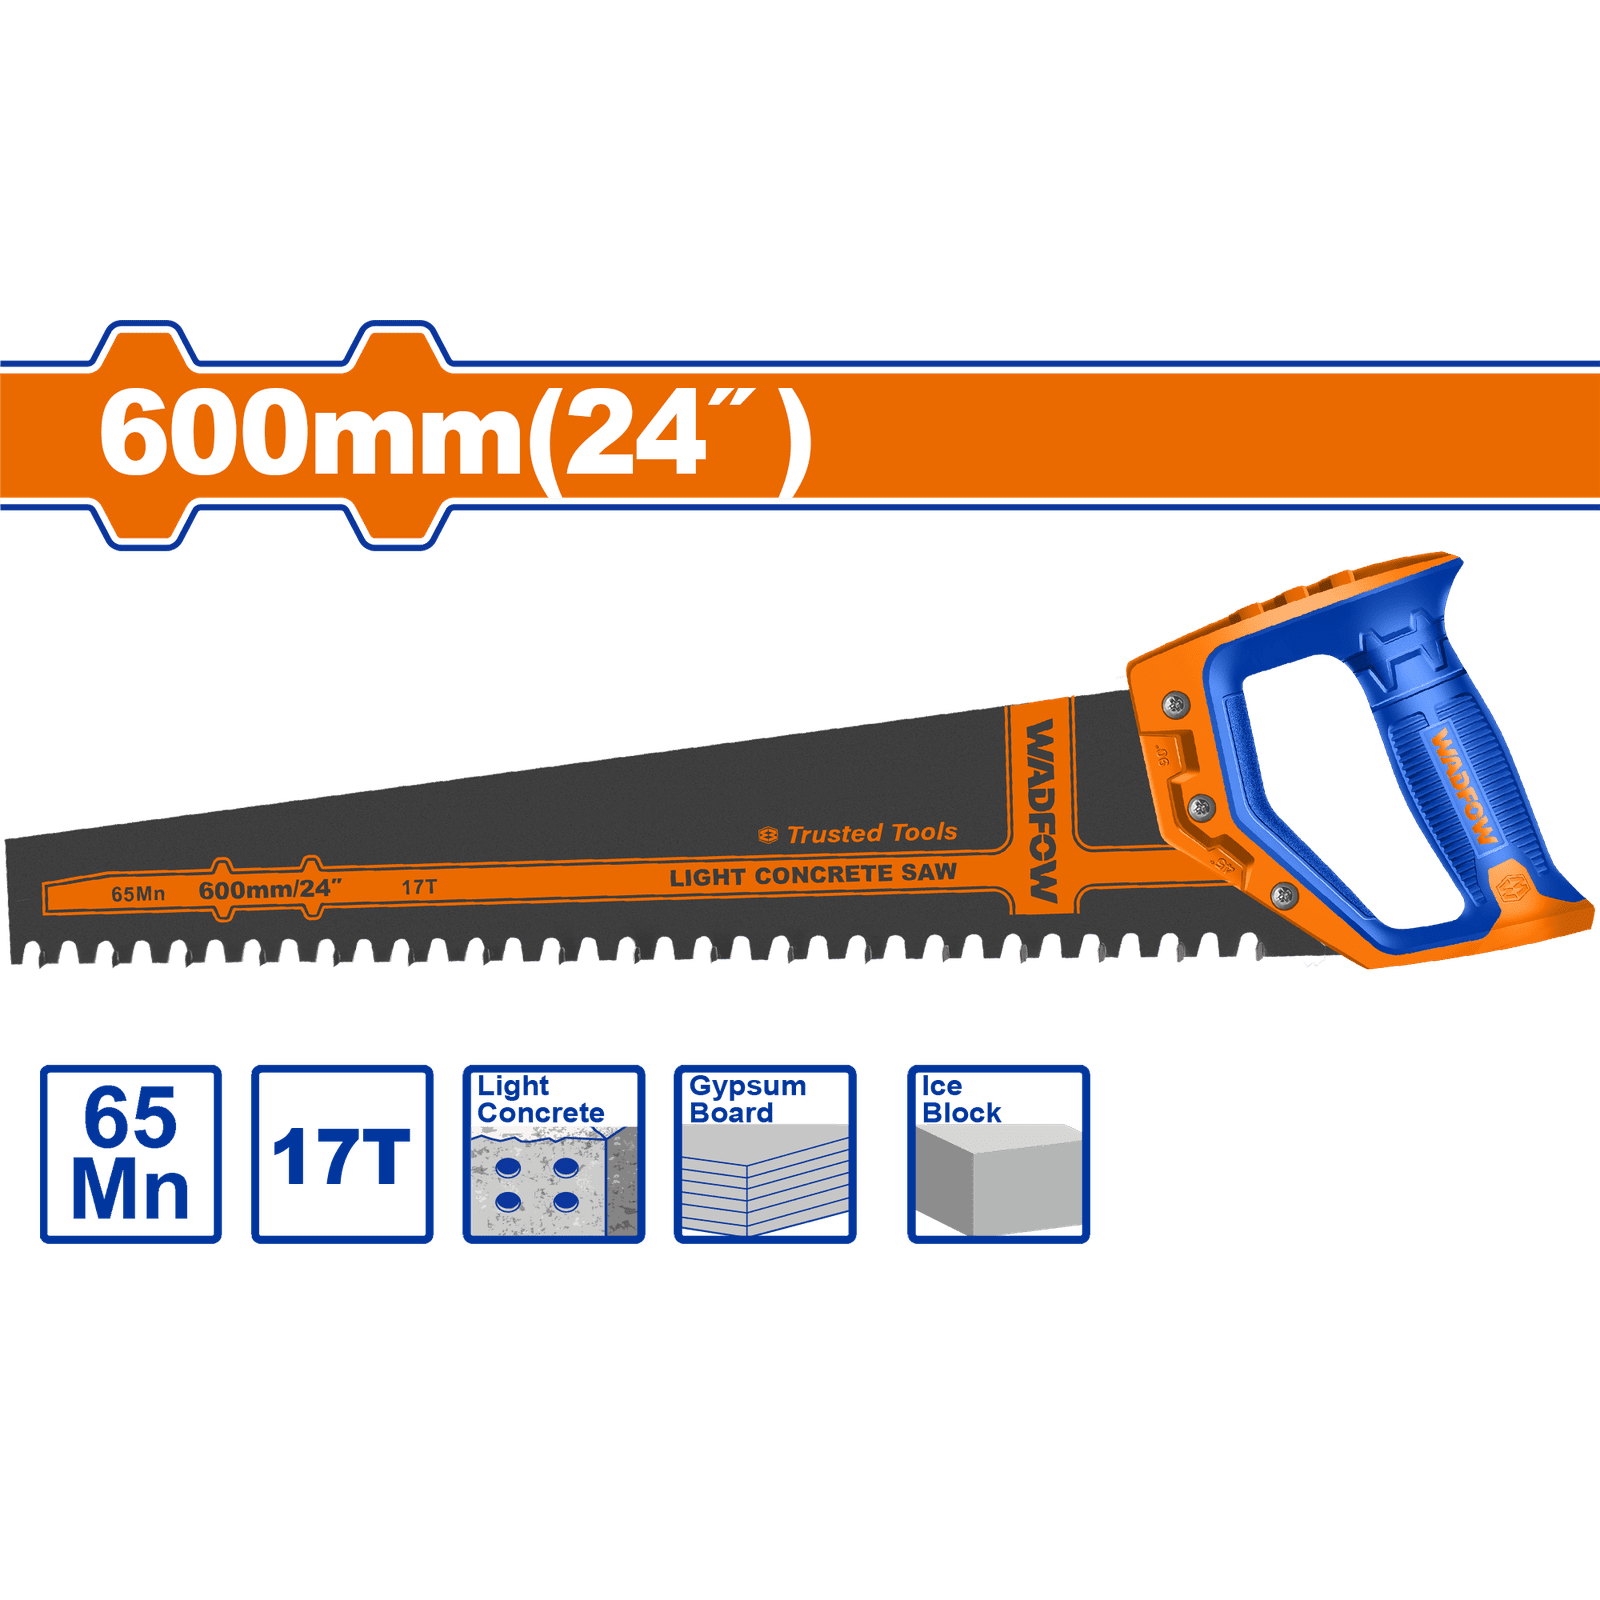 Wadfow 24" Light Concrete Hand Saw - WHW9124 | Supply Master | Accra, Ghana Hand Saws & Cutting Tools Buy Tools hardware Building materials